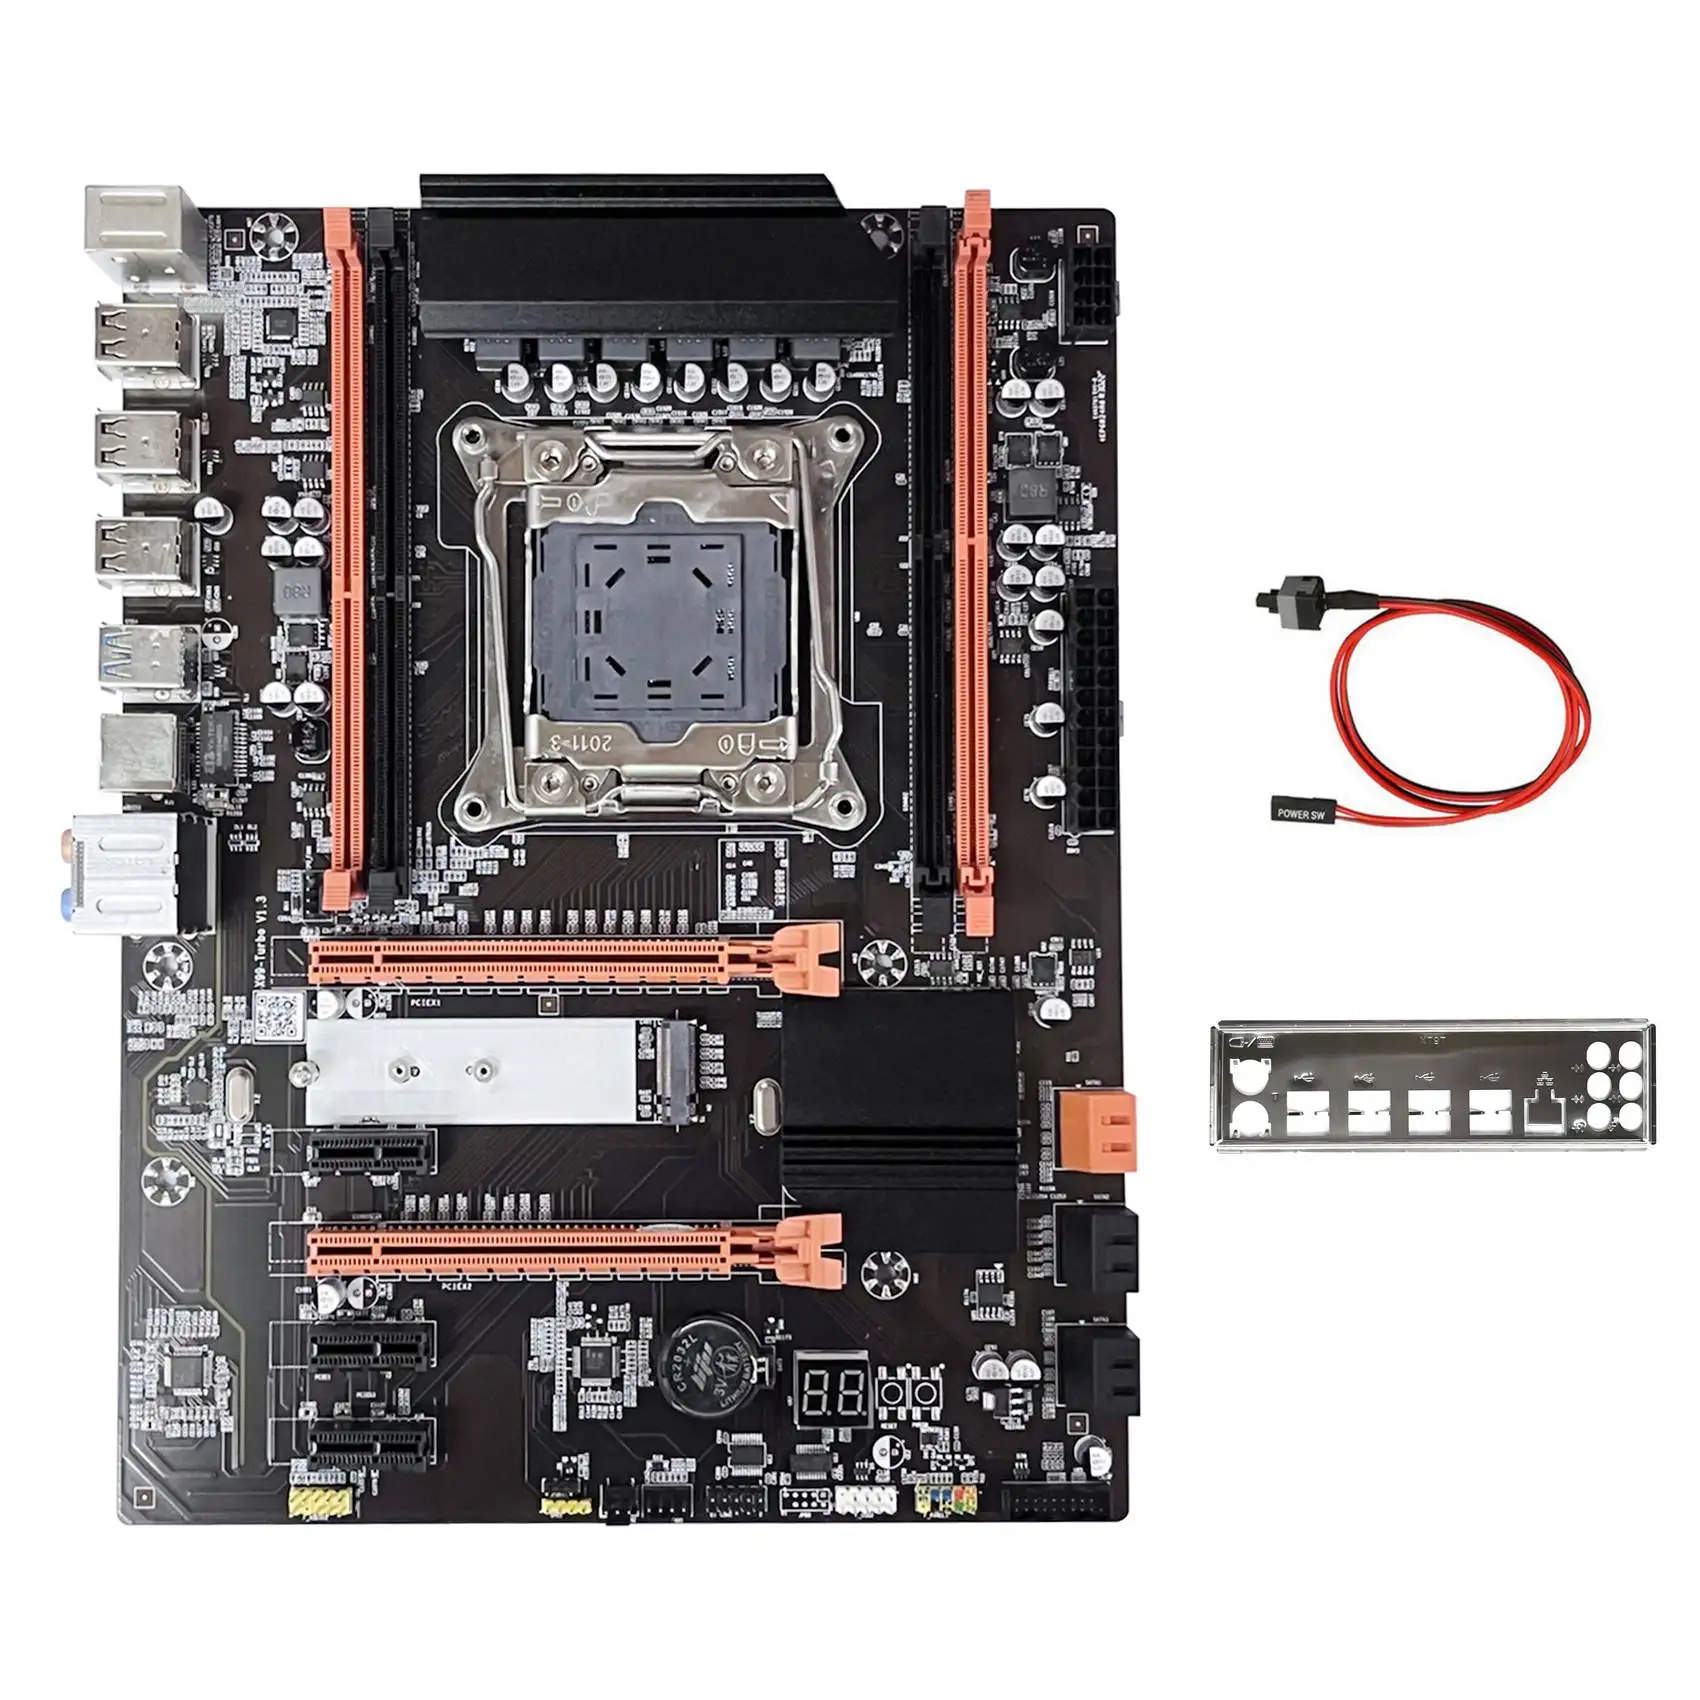 

X99 Motherboard+Baffle+Switch Cable LGA2011-V3 M.2 NVME NGFF Support DDR4 4X16G Support E5-2609 E5-2650 E5-2667 V3 CPU